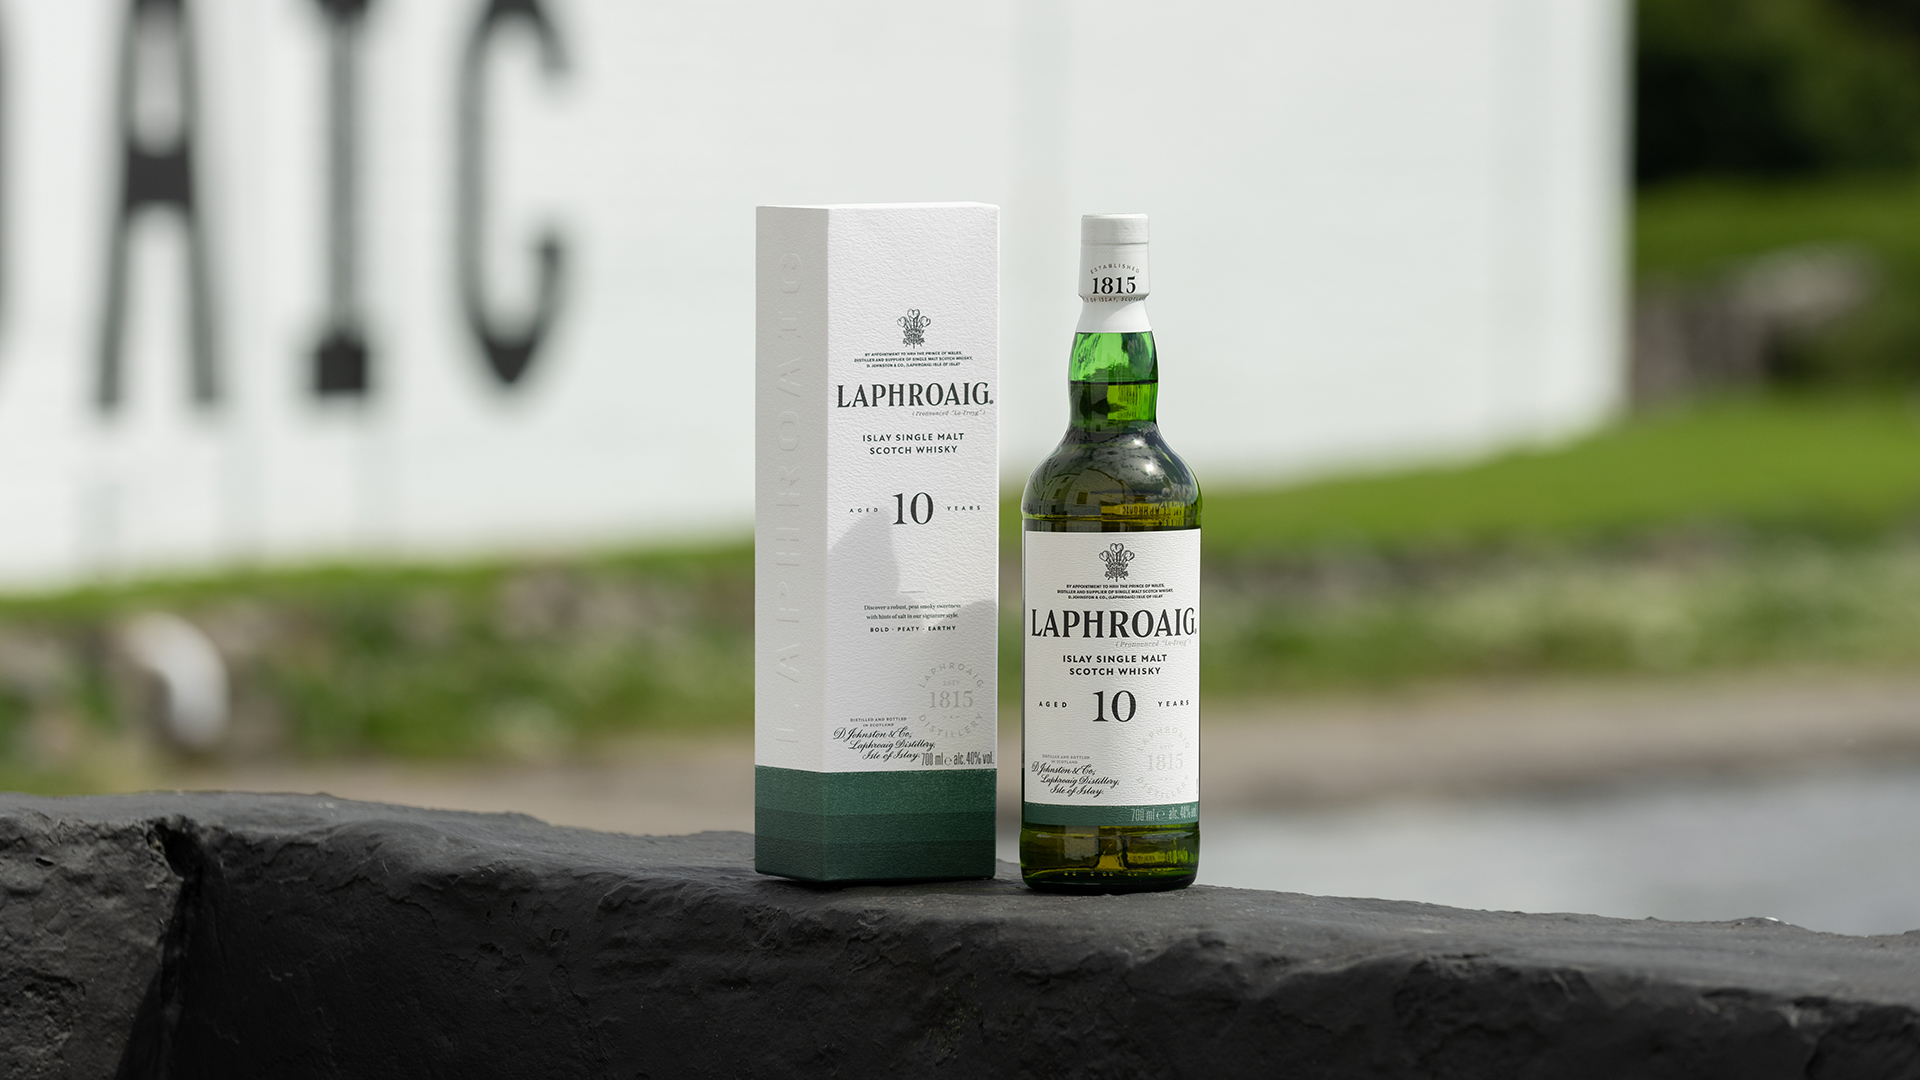 Laphroaig Unveils Packaging Redesign by Design Bridge and Partners That Celebrates the Iconic Islay Distillery’s Heritage and Supports Its Long-term Sustainability Goals